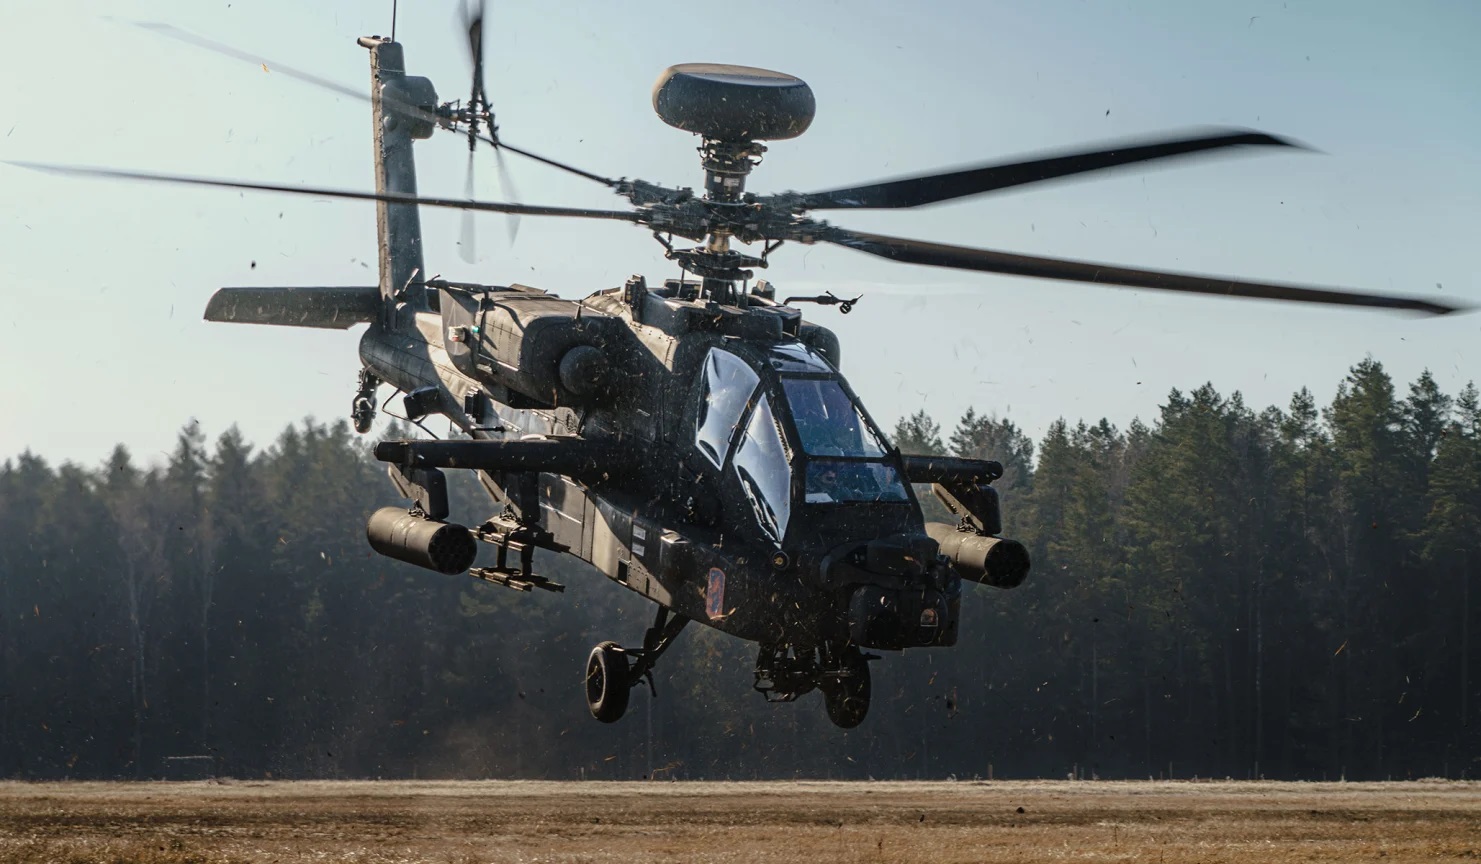 The UK denied information about the transfer of Apache AH64 E attack helicopters to Ukraine